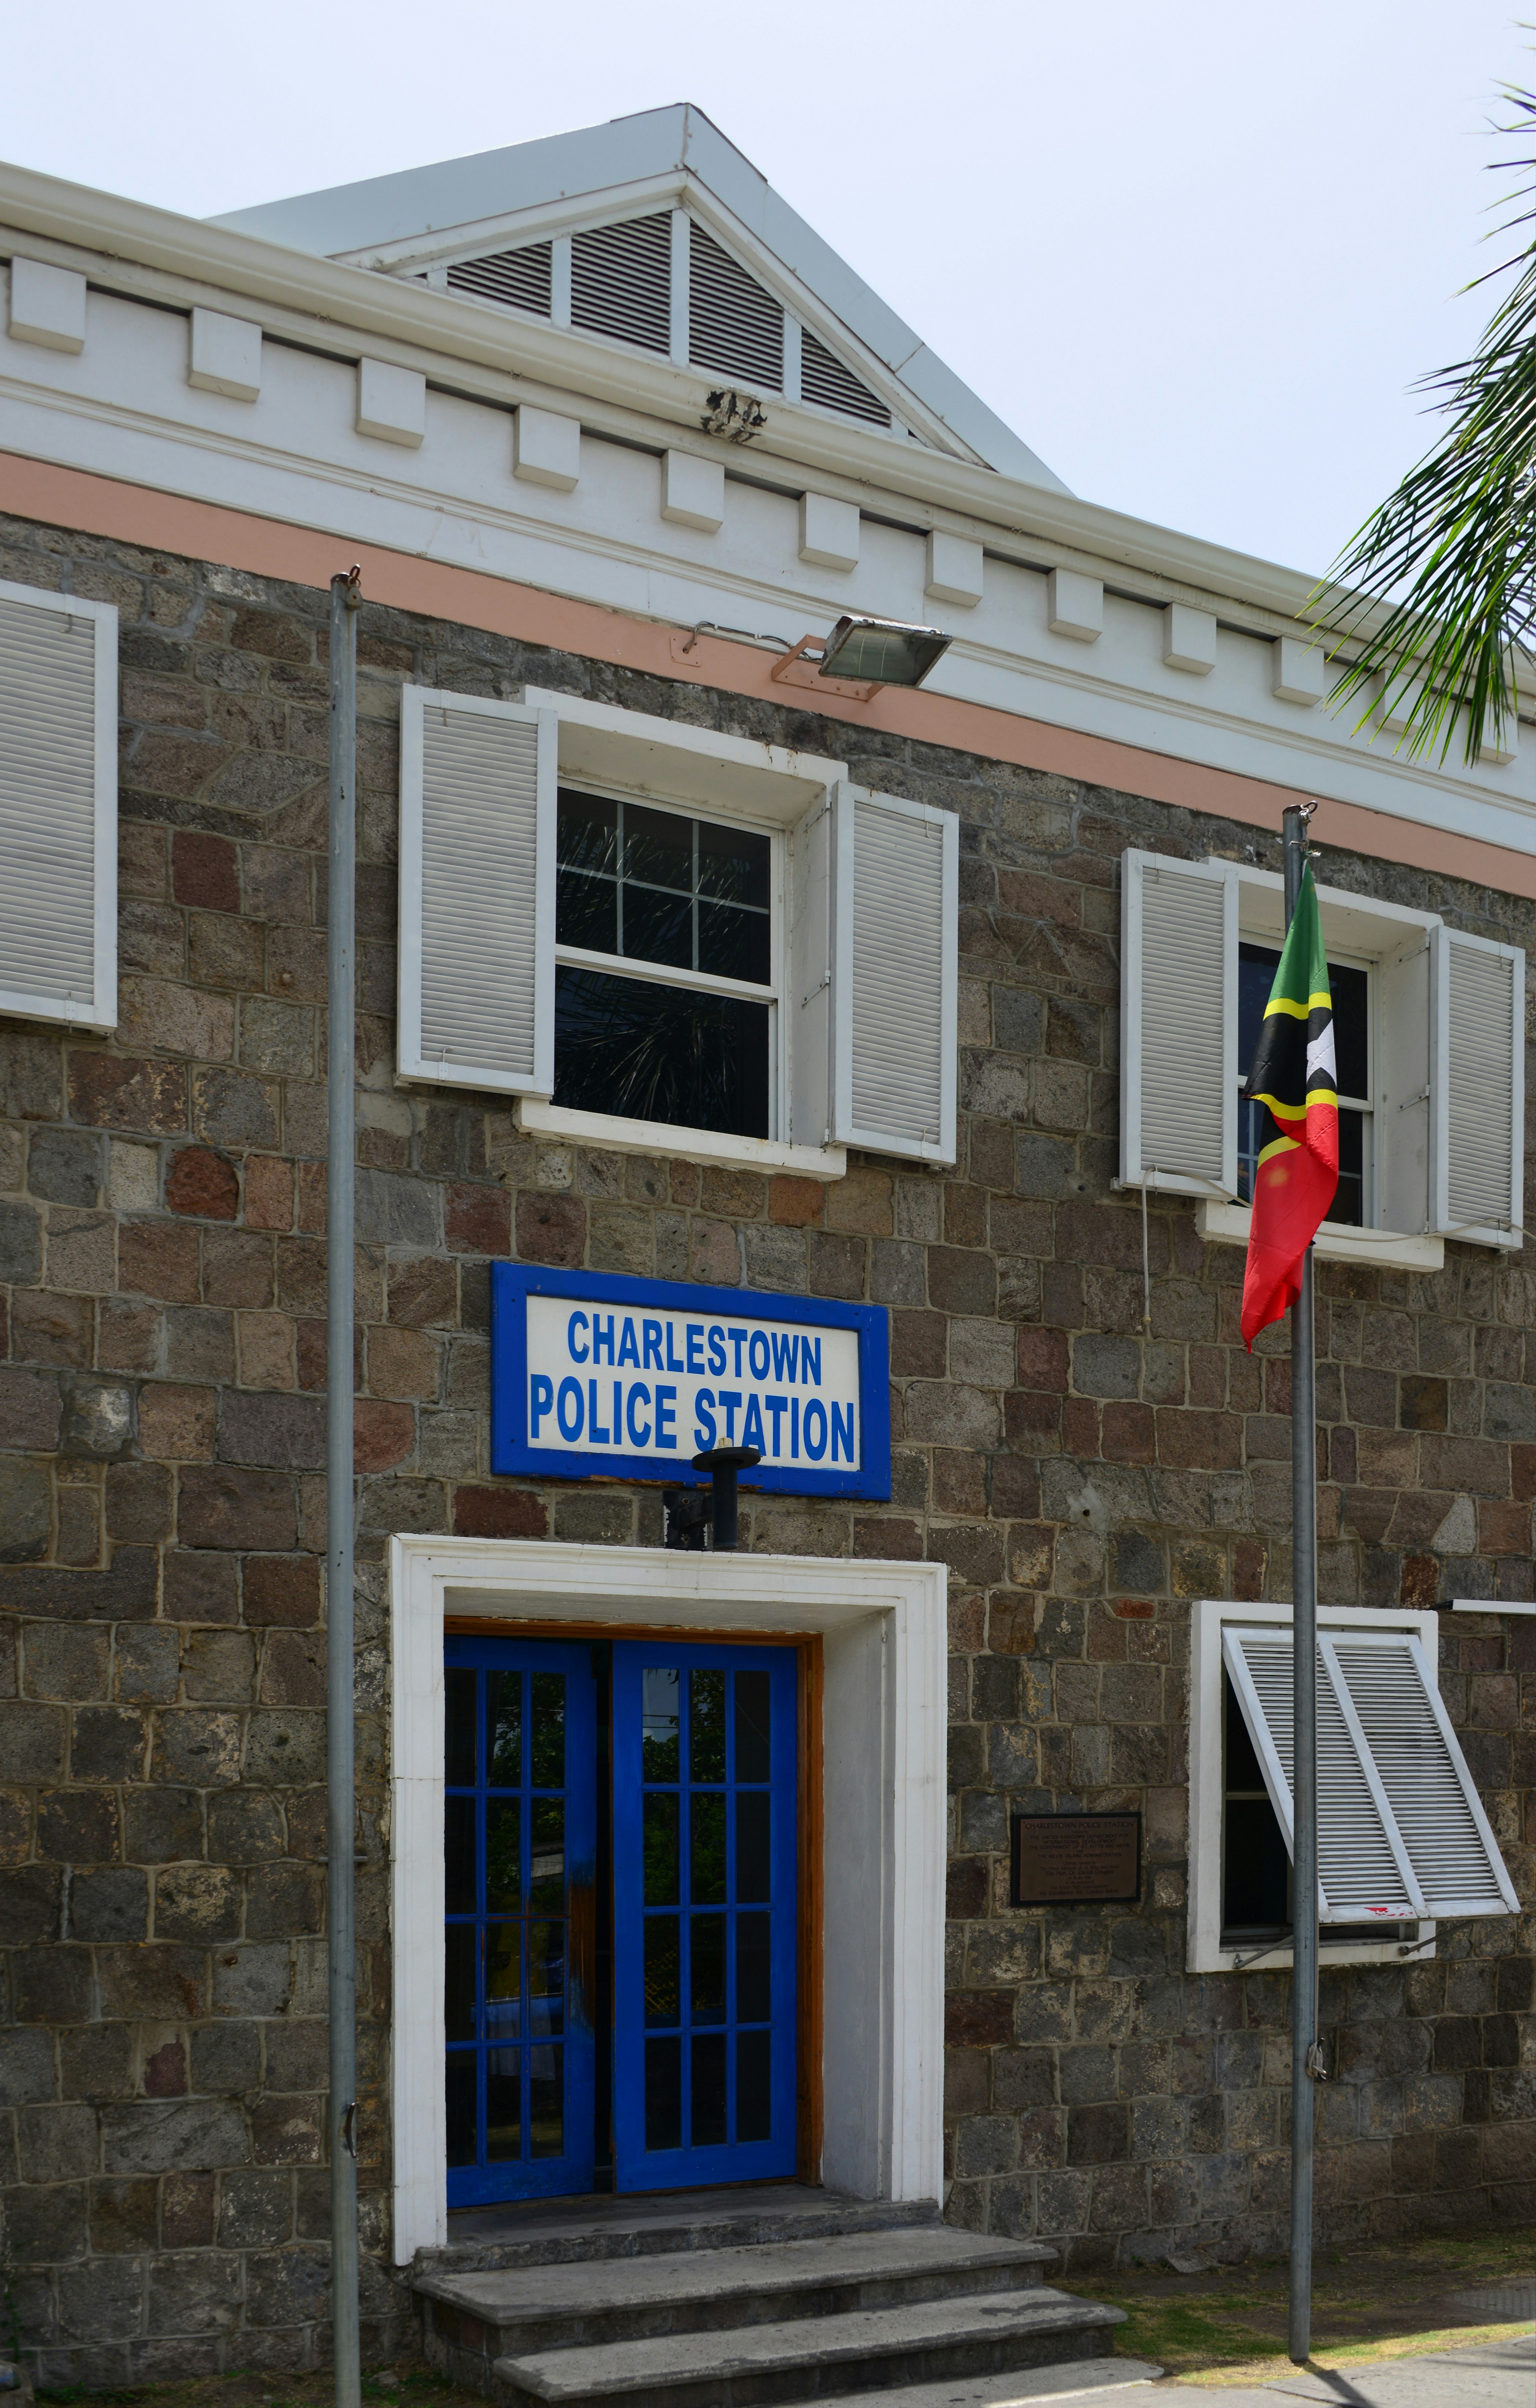 Exterior view of the Charlestown Police Station in Nevis